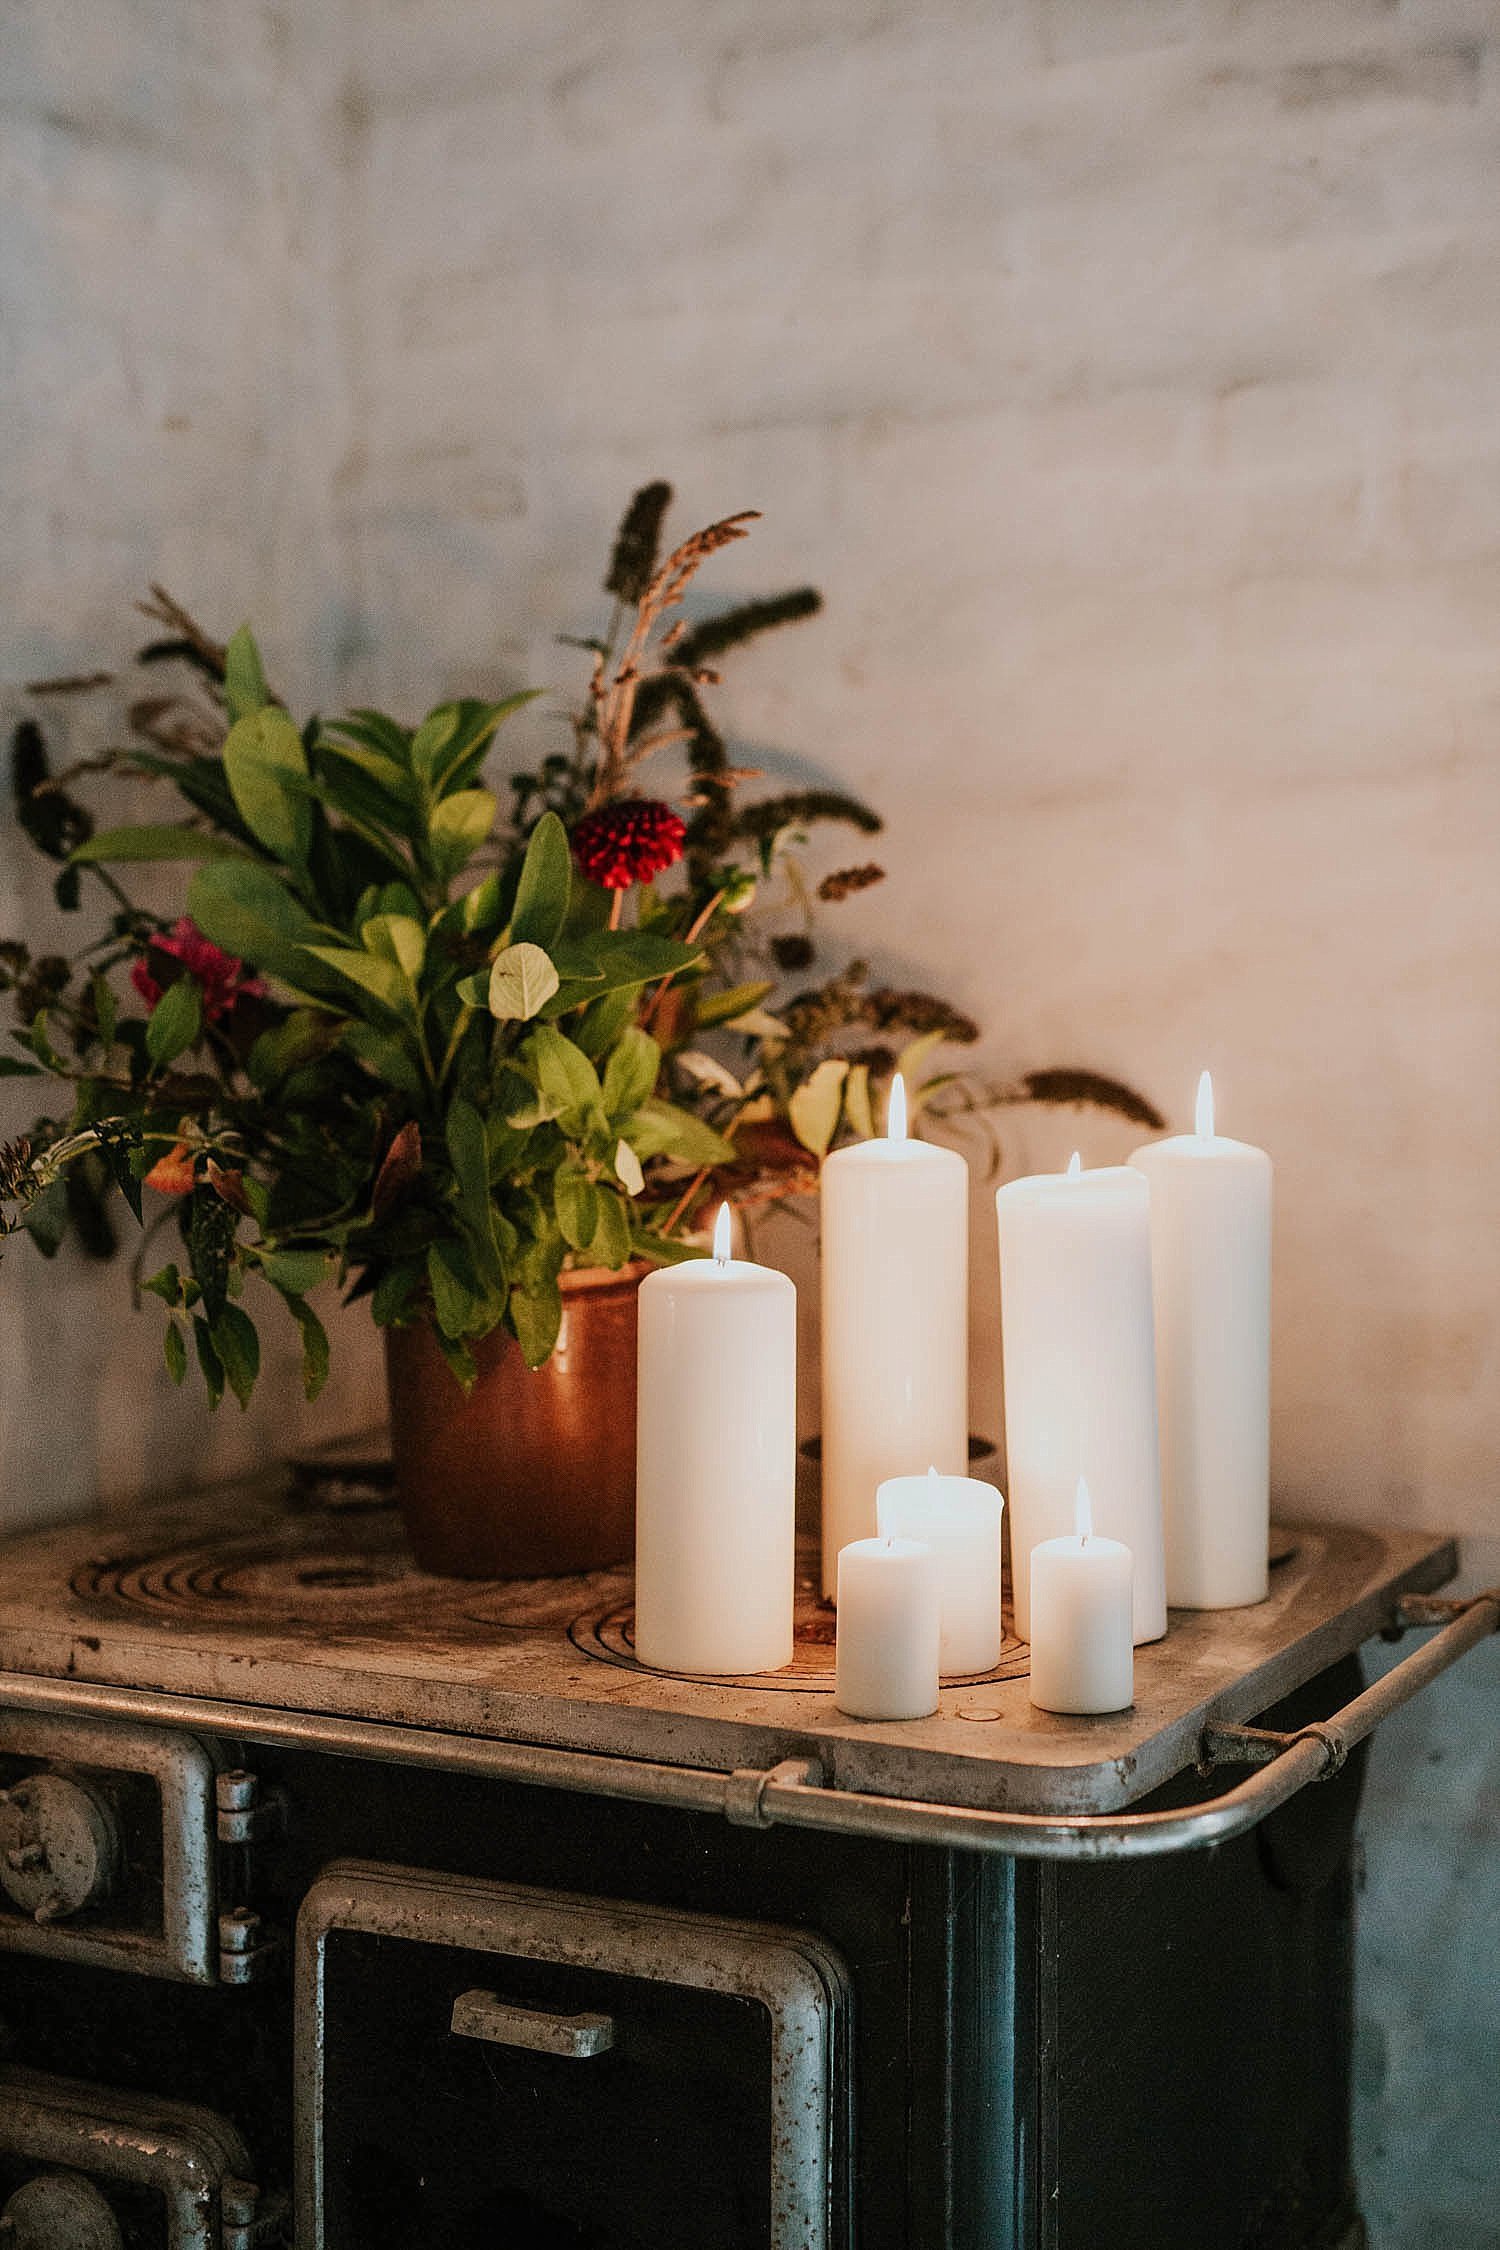 Candles and flowers - wedding decor